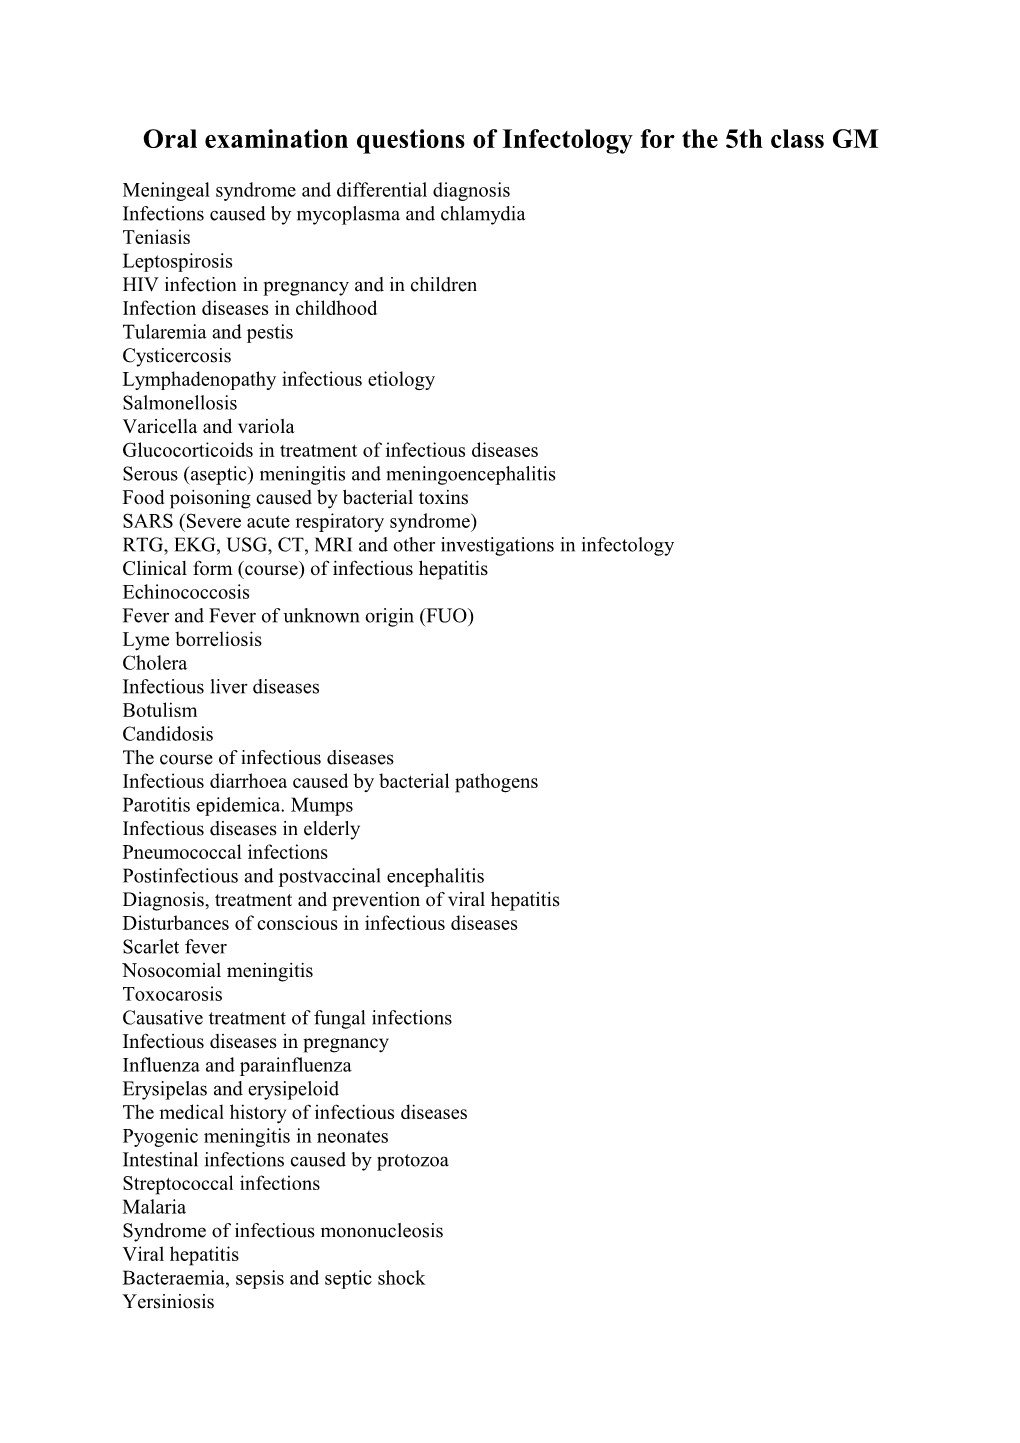 Oral Examinationquestions of Infectologyforthe 5Th Class GM